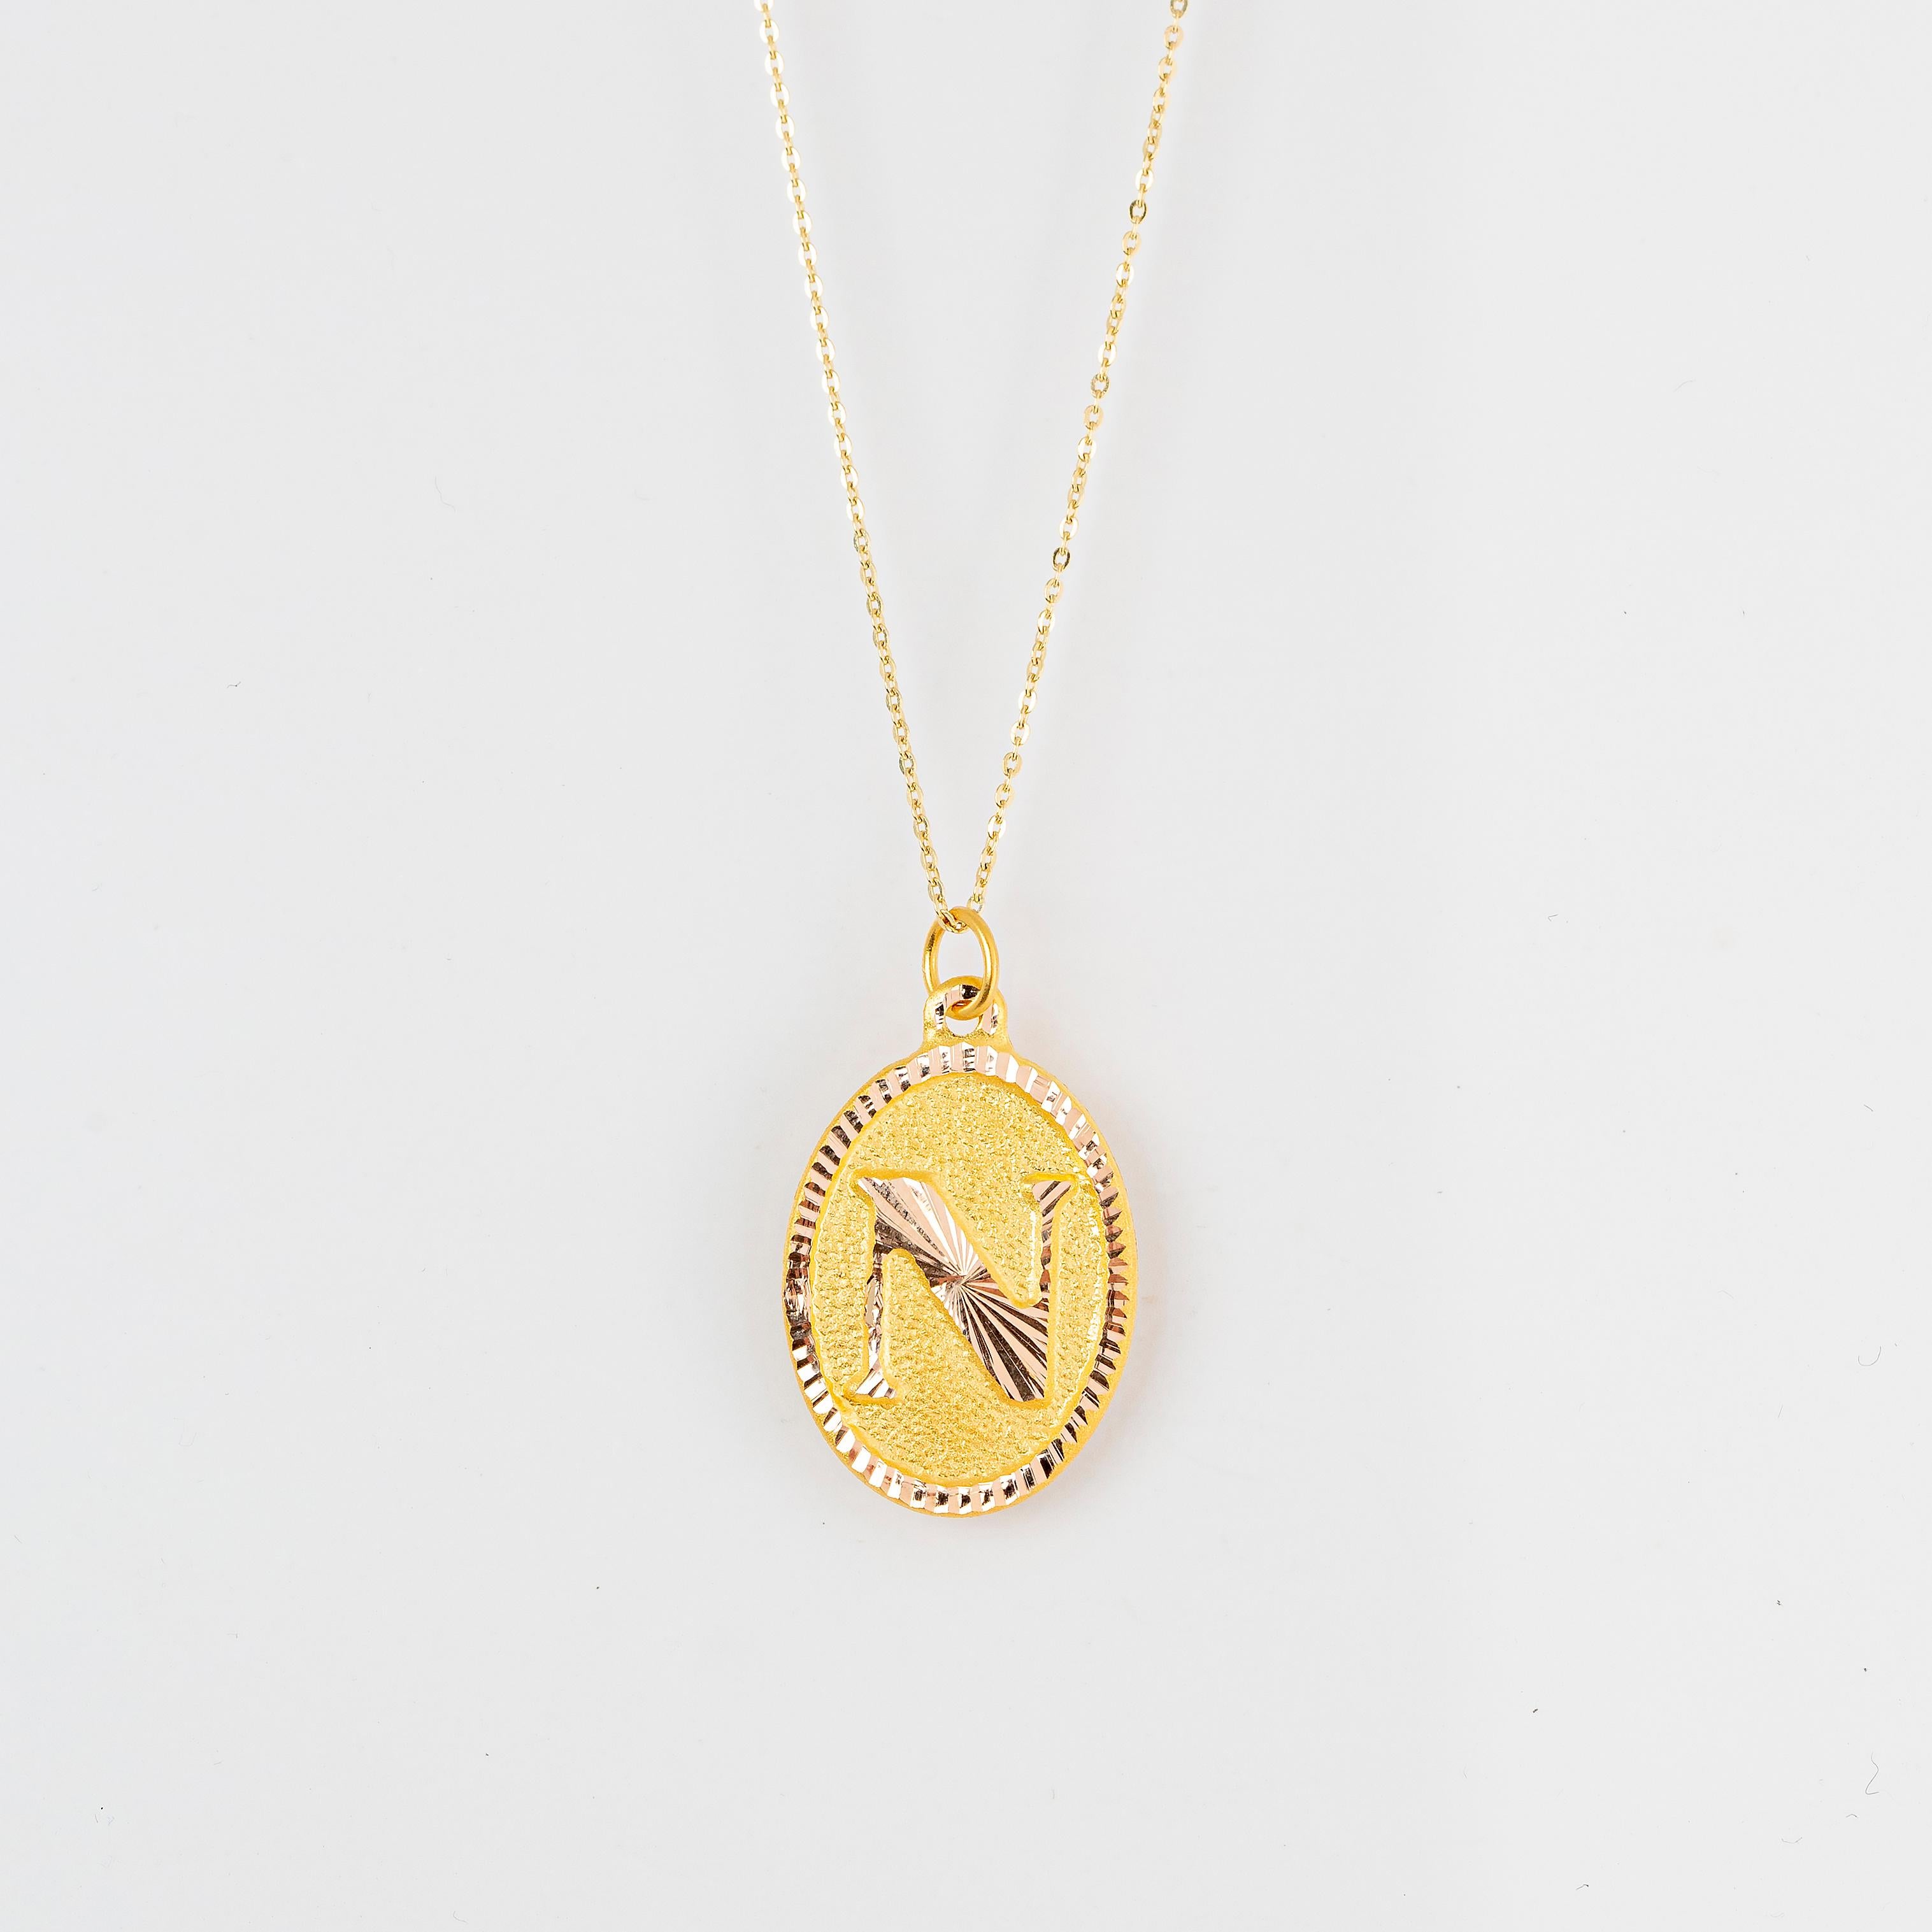 14K Gold Necklaces, Letter Necklace Models, Letter N Gold Necklace-Gift Necklace Models, Daily Necklaces, Letter Jewelry

It's a manual labor product. 'Handmade'. Fashionable product.

This necklace was made with quality materials and excellent